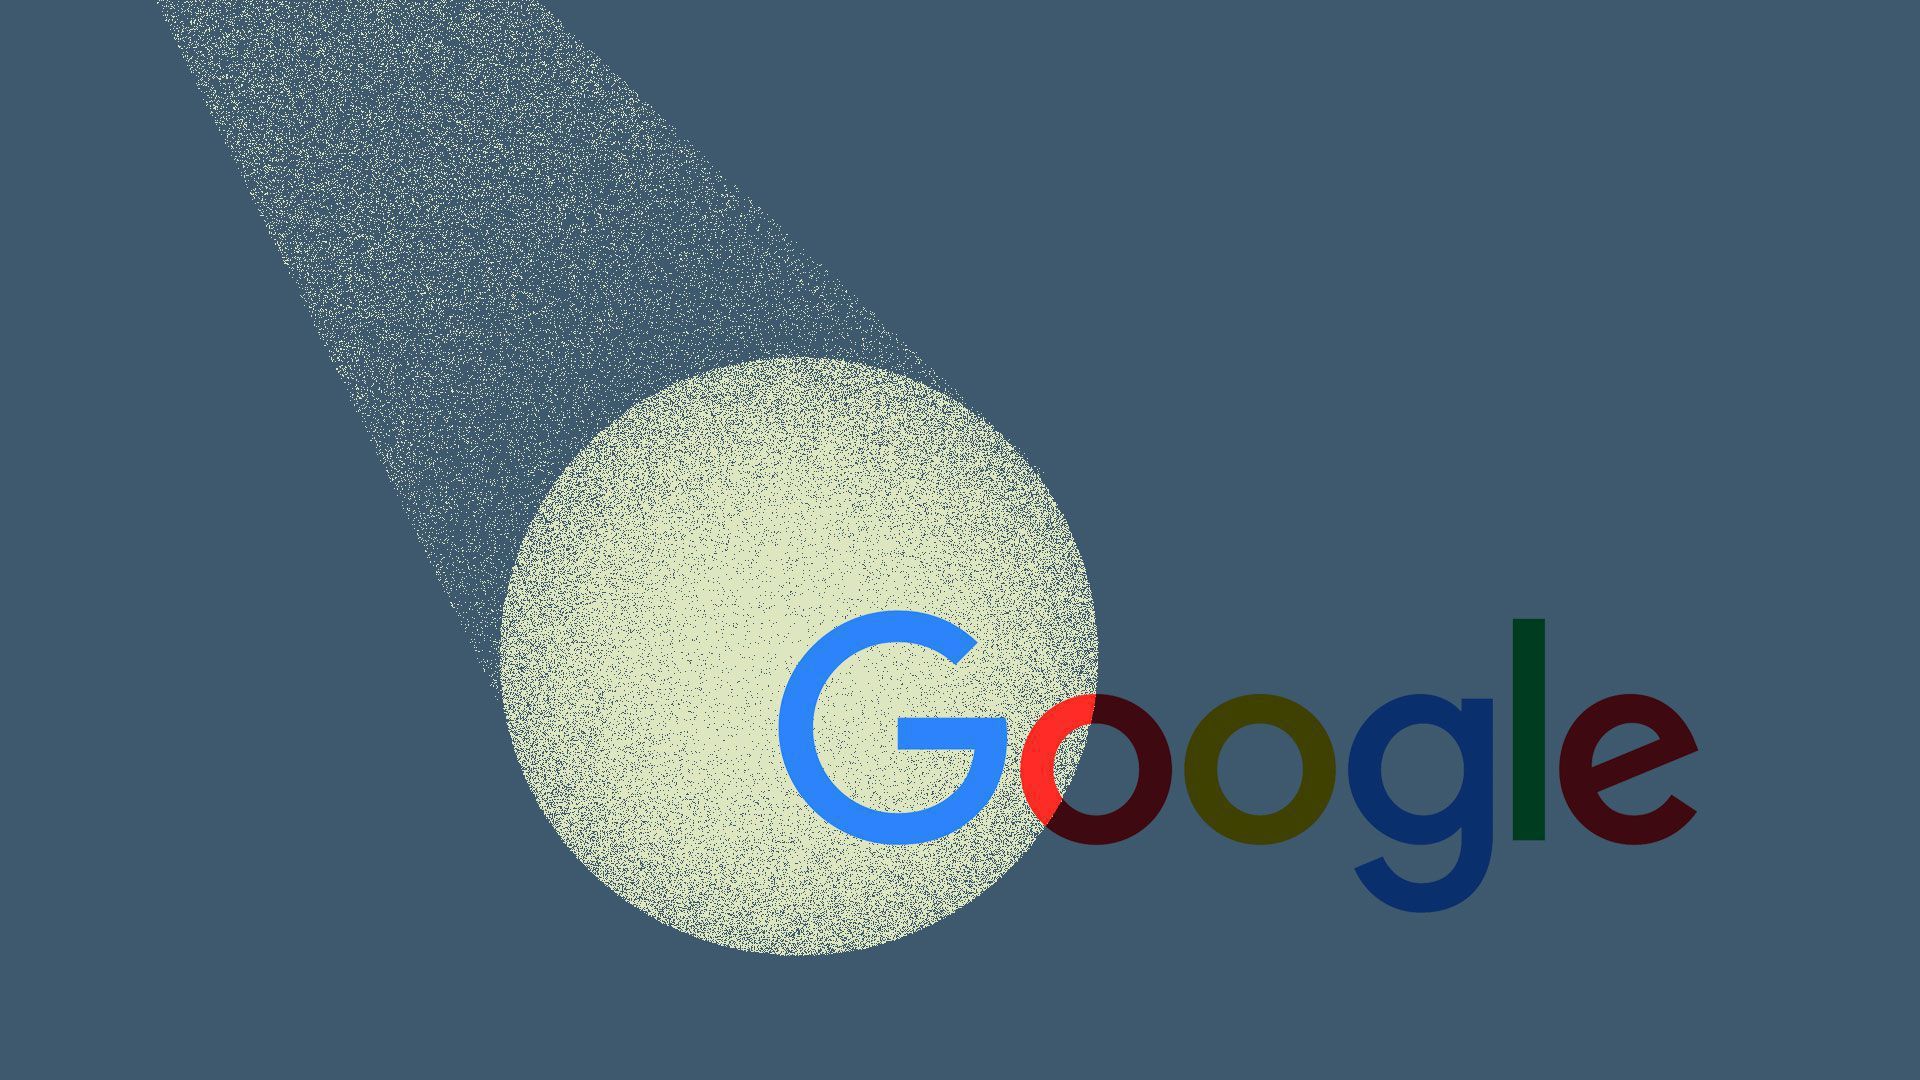 An illustration of the Google logo with the spotlight on the first two letters